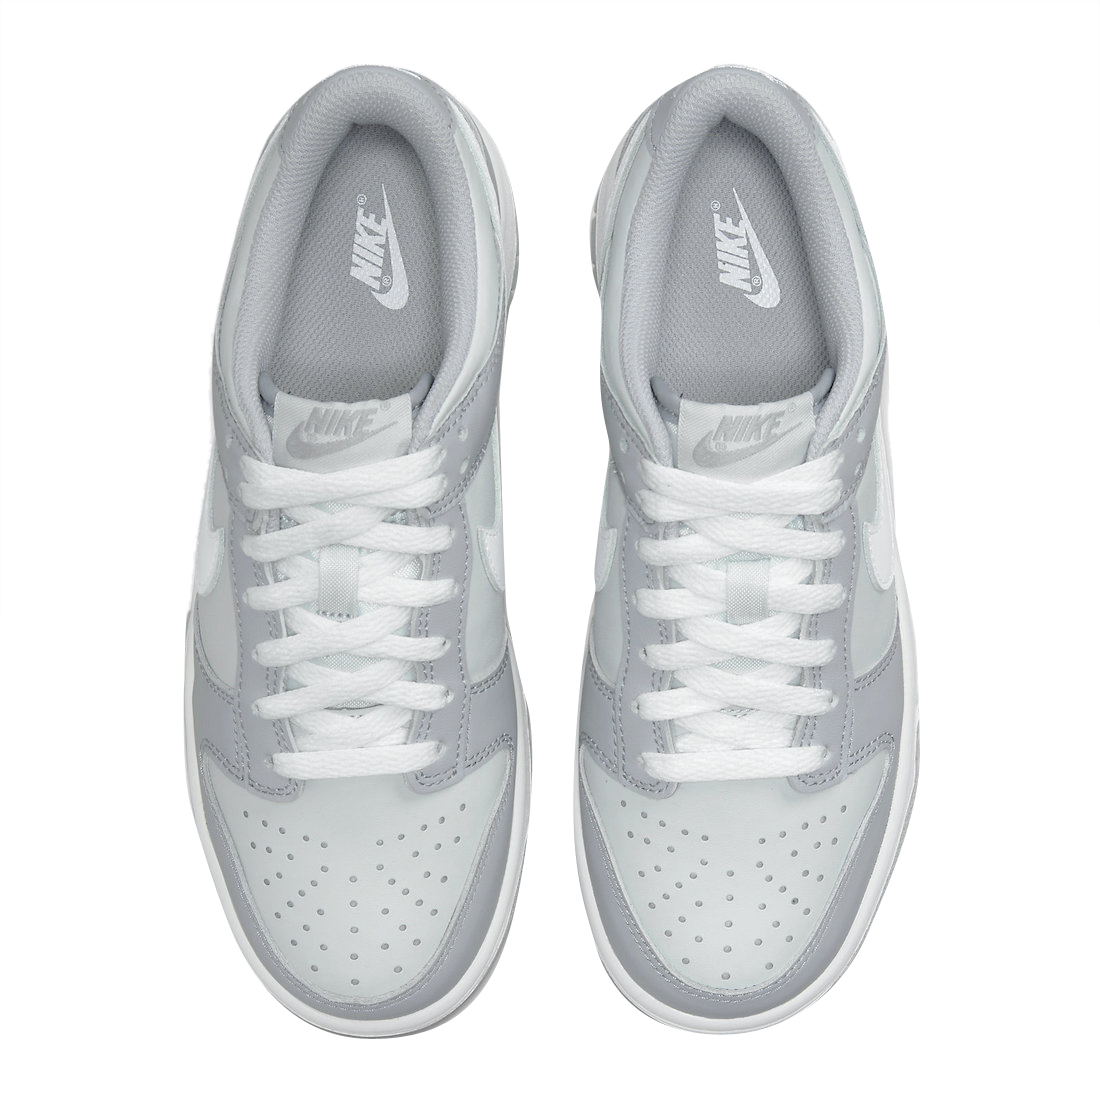 Nike Dunk Low GS Grey DH9765-001